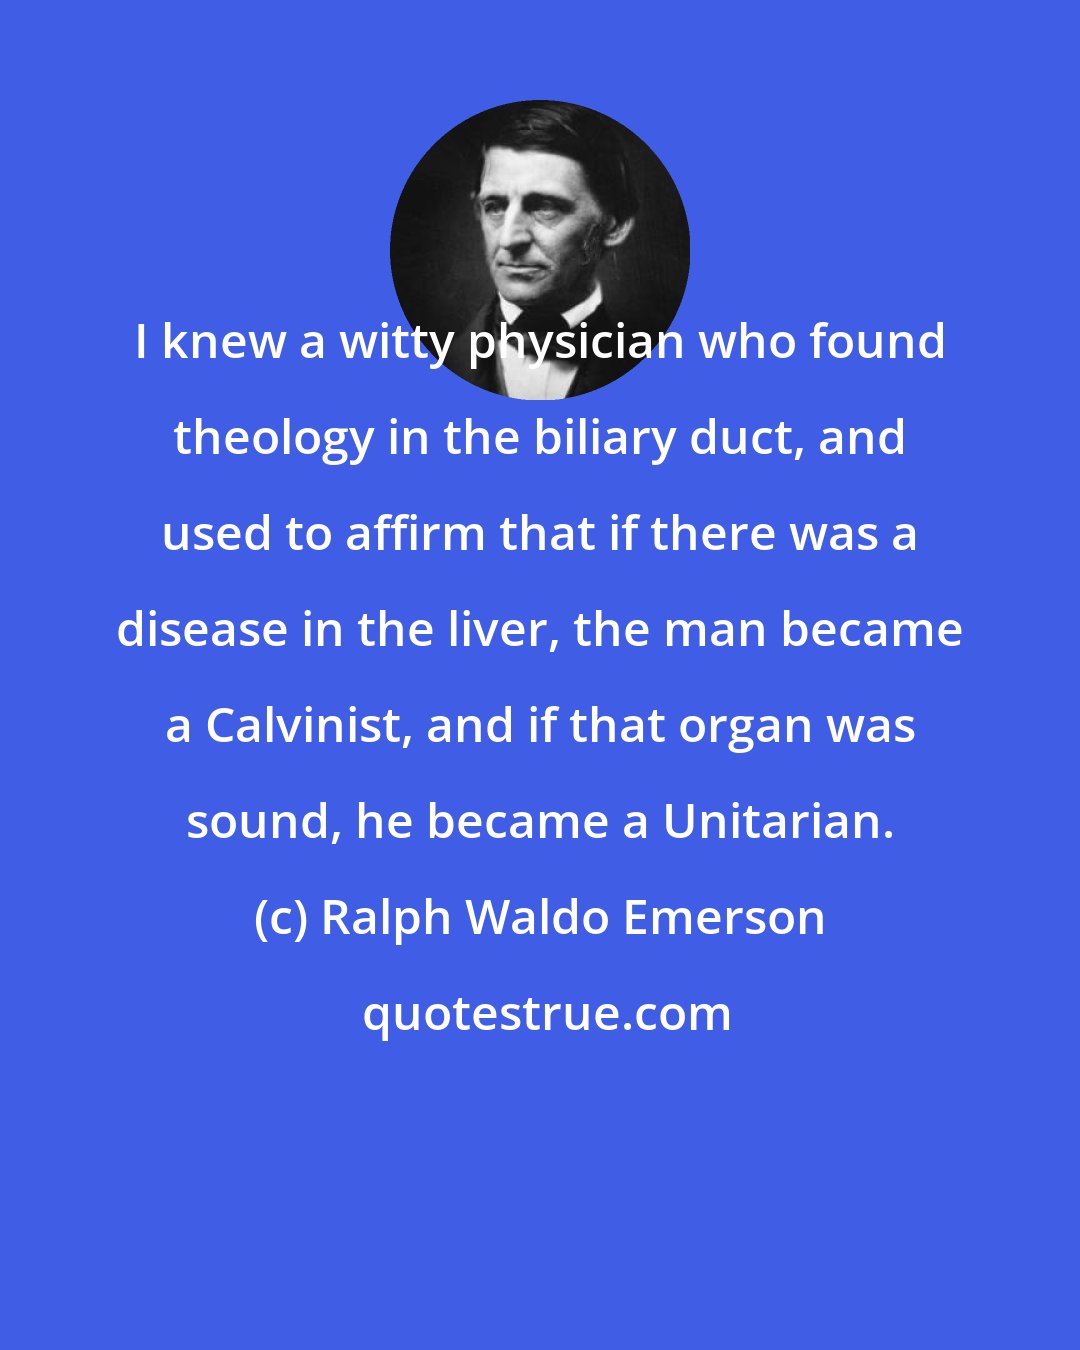 Ralph Waldo Emerson: I knew a witty physician who found theology in the biliary duct, and used to affirm that if there was a disease in the liver, the man became a Calvinist, and if that organ was sound, he became a Unitarian.